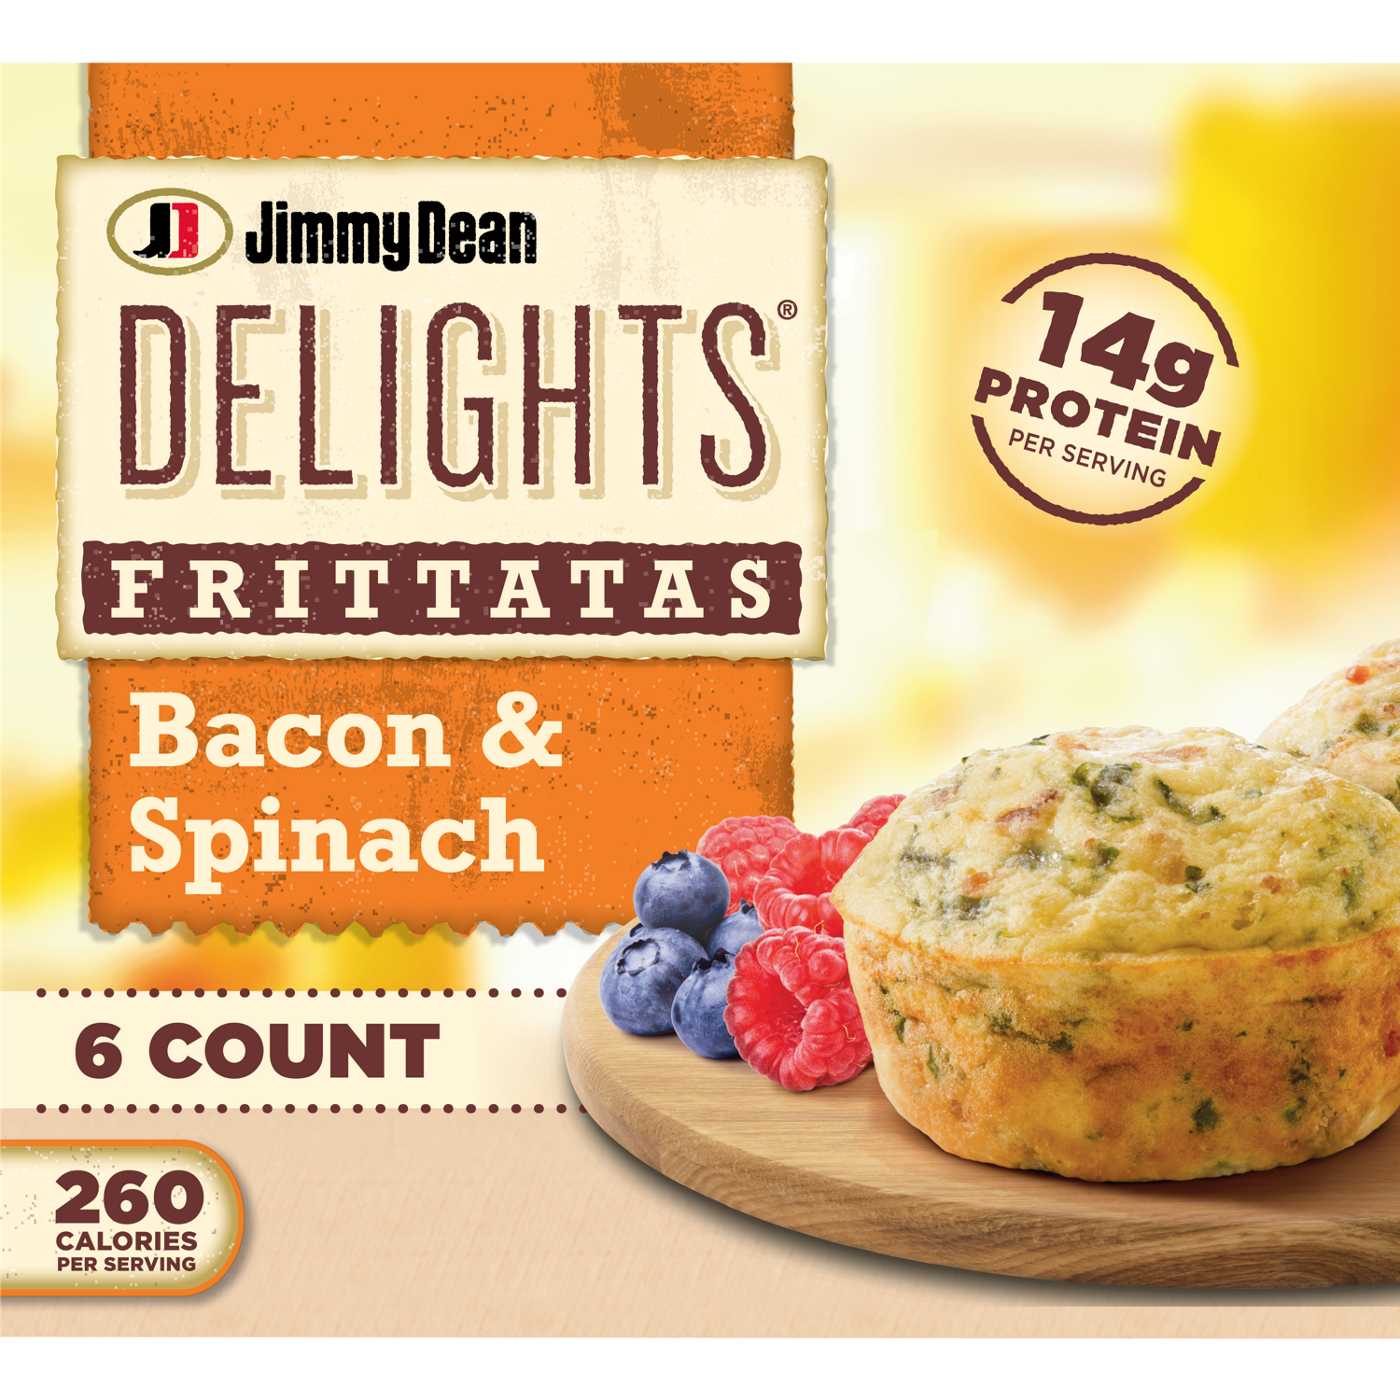 Jimmy Dean Delights Bacon & Spinach Frittatas; image 1 of 3